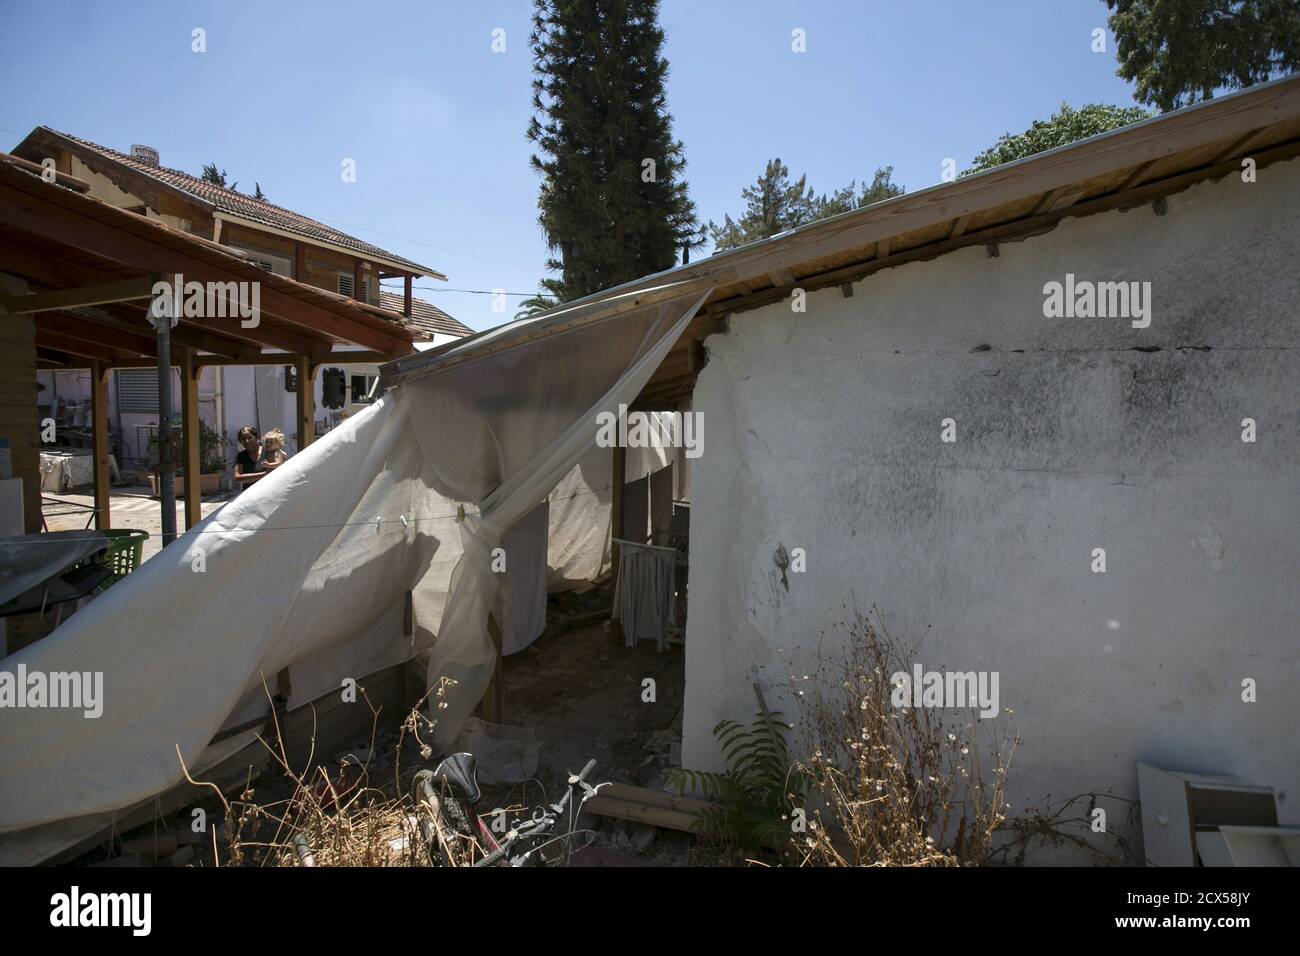 A plastic cover is seen outside a house, that was damaged by a rocket fired from Gaza during the 2014 Gaza war, in Yahud near Tel Aviv, Israel, July 7, 2015. July 8th marks the one-year anniversary of the war between Israel and Hamas in Gaza. The 50-day conflict began after Israel said it was determined to put an end to constant rocket-fire from Gaza, launching an intense air and ground assault to do so. It was the third major conflict between Israel and Hamas militants since the Islamist group seized control of Gaza in 2007. The fighting killed more than 2,100 Palestinians, most of them civil Stock Photo